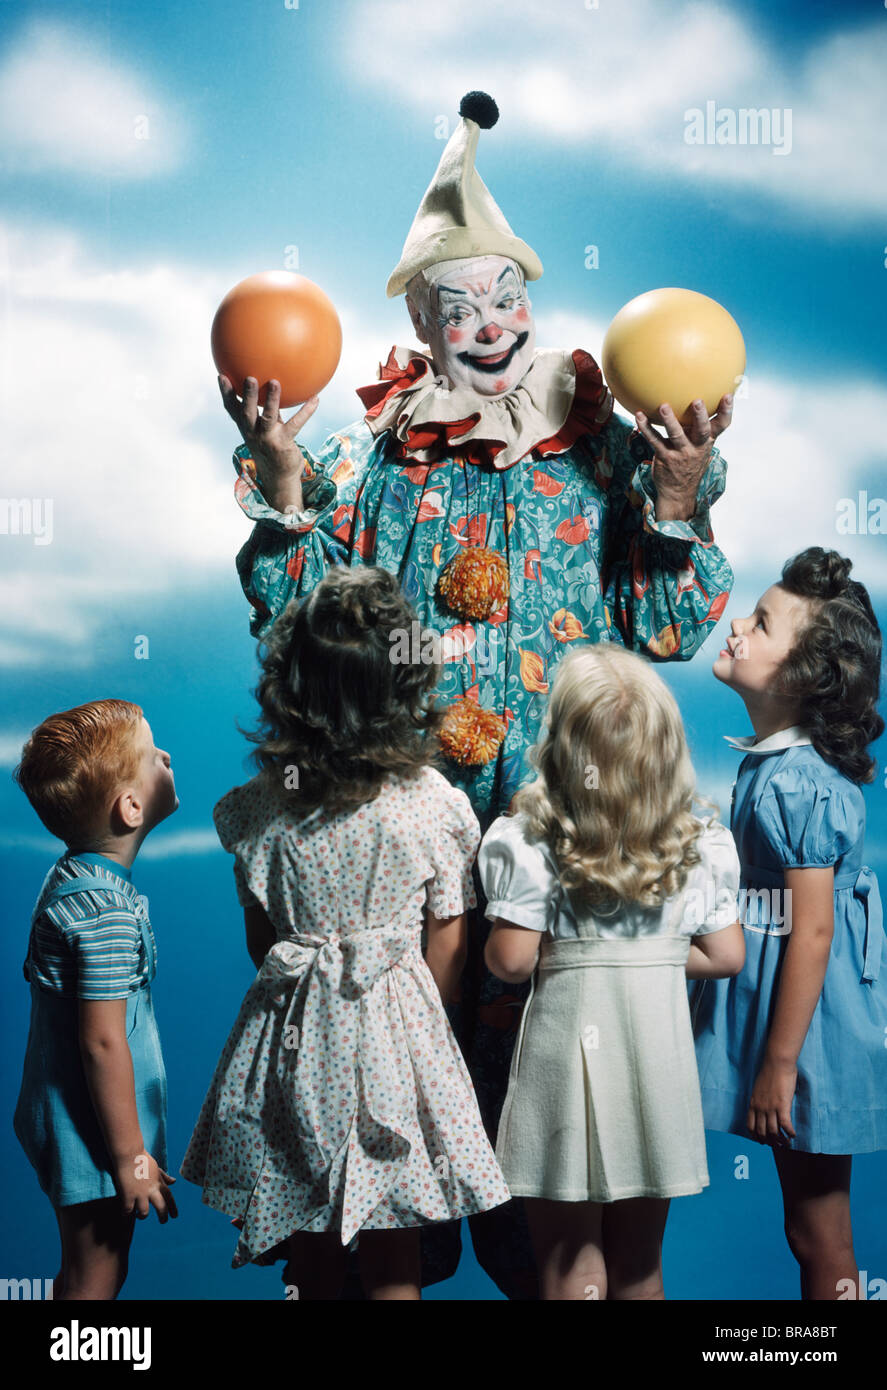 1940s 1950s GROUP OF CHILDREN WATCHING A CLOWN HANDLE ORANGE AND YELLOW BALLS Stock Photo